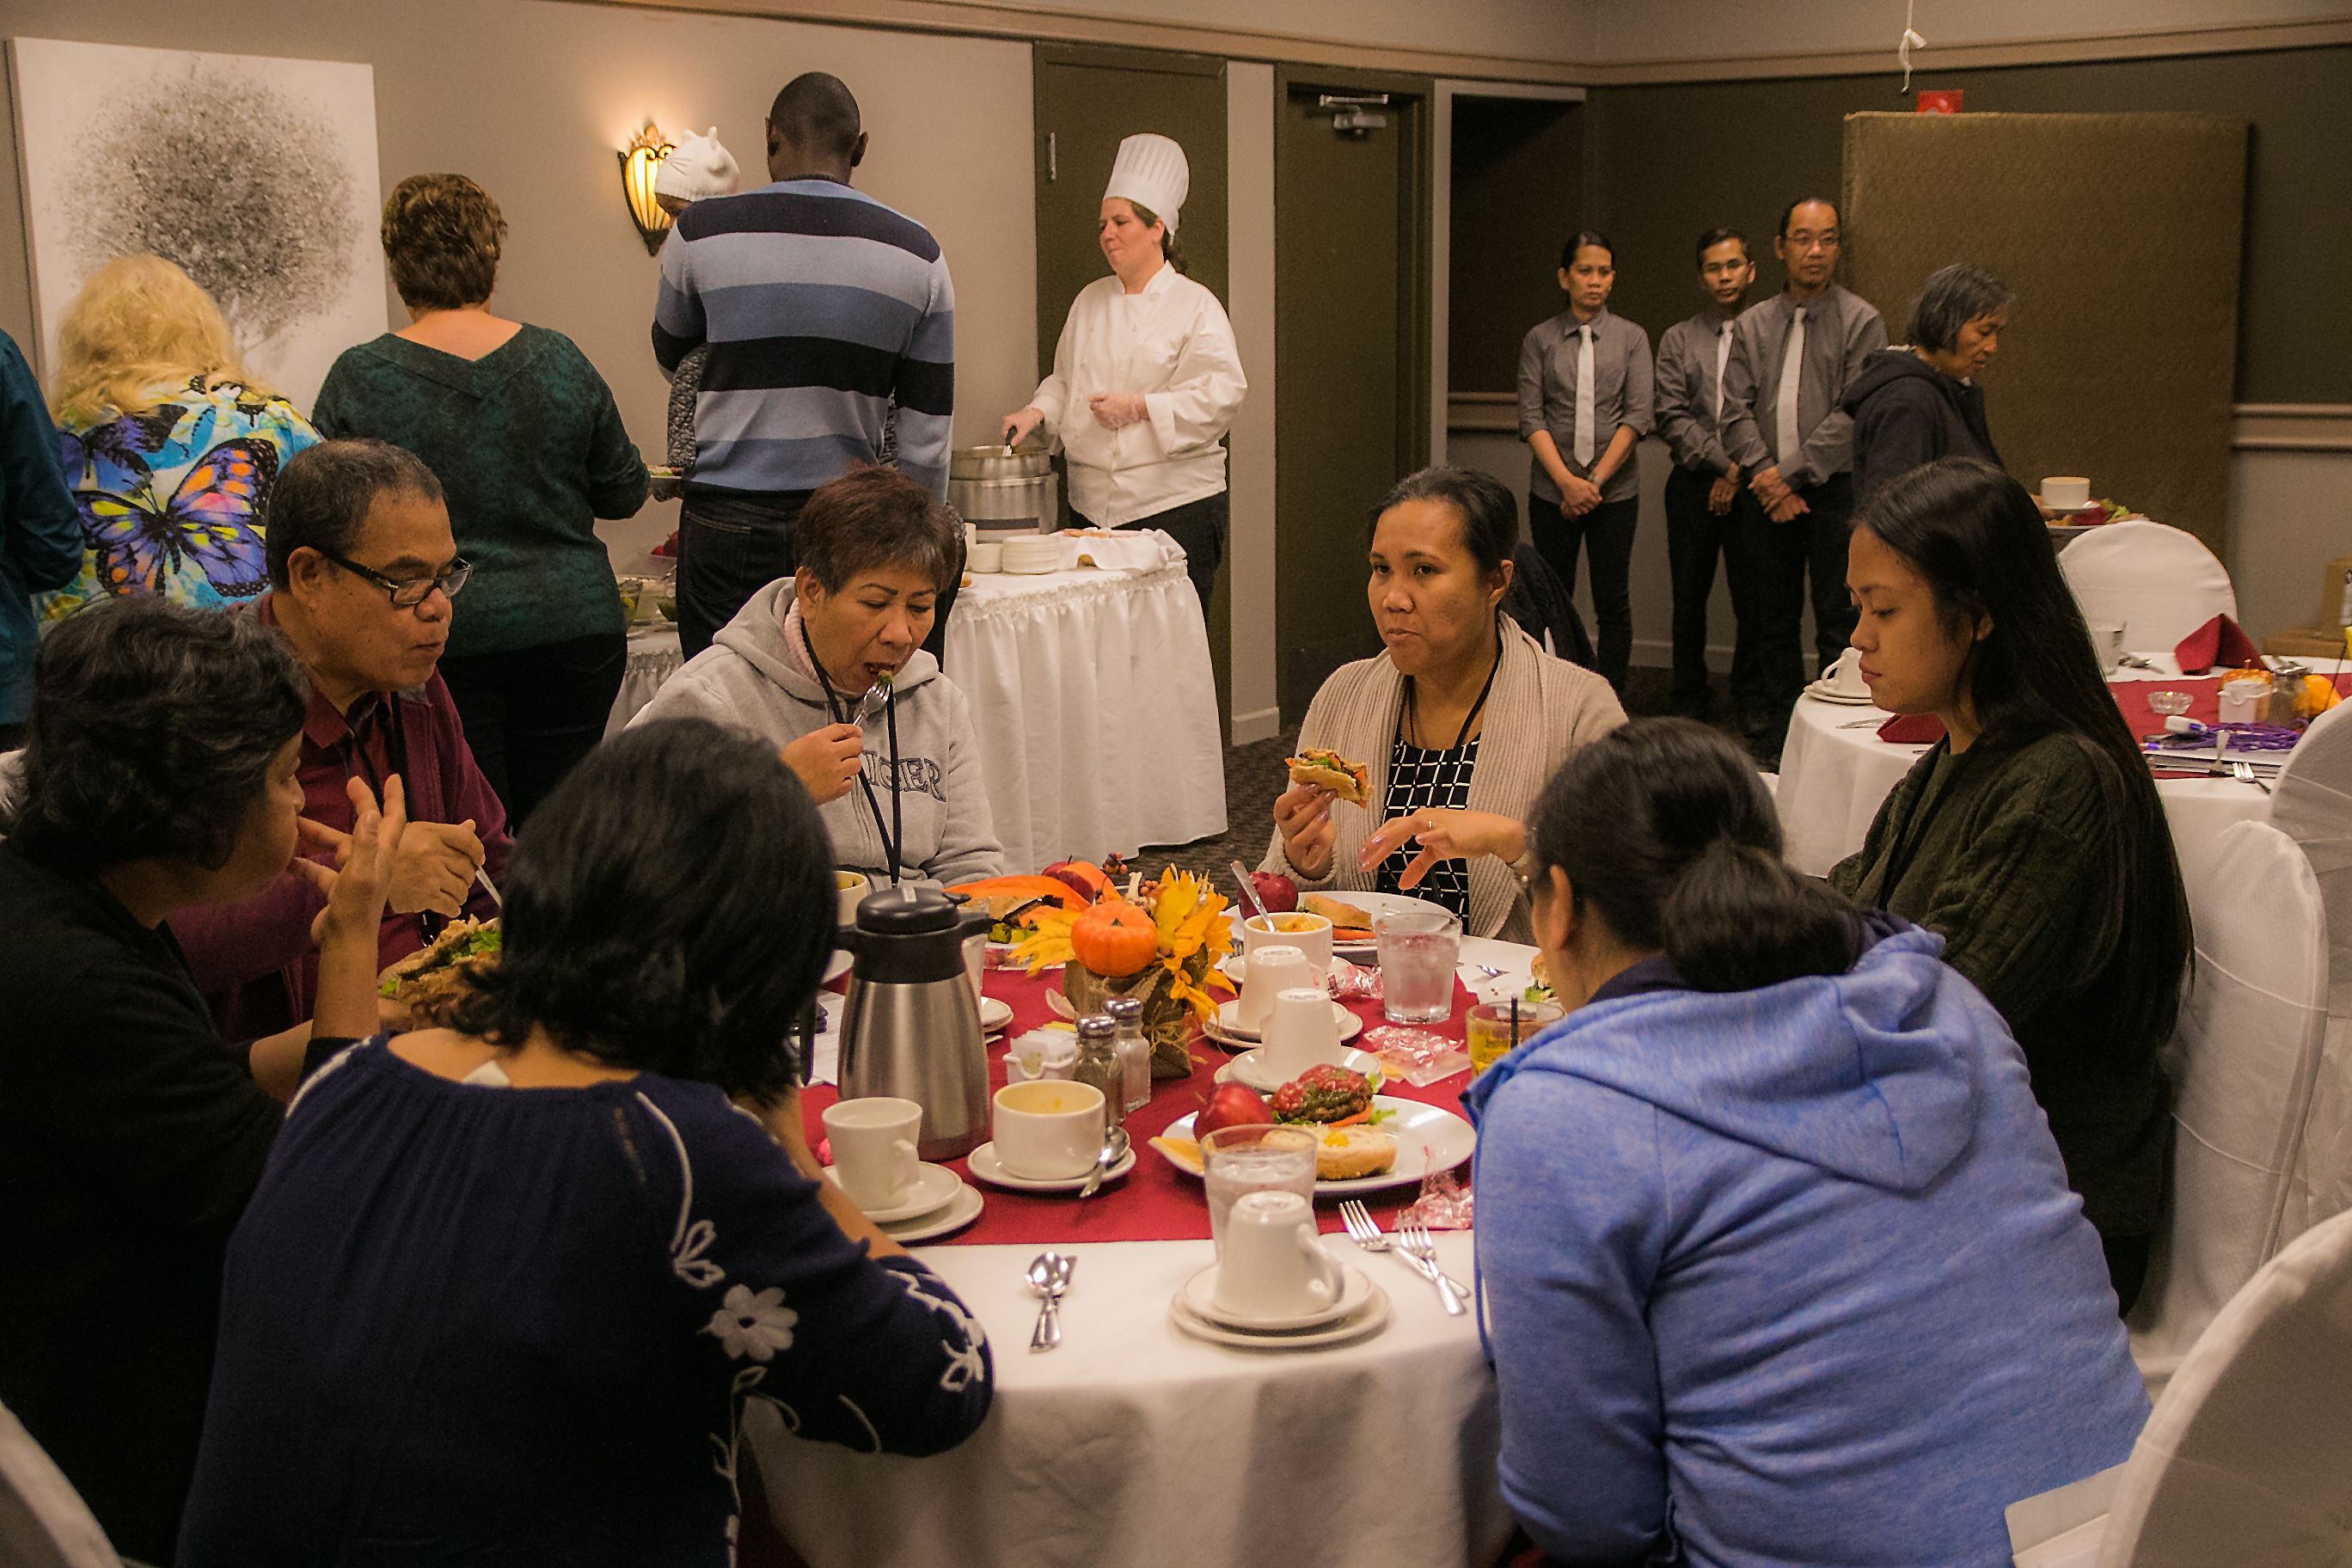 Health training participants enjoy fellowship and a delicious meal during the weekend event.